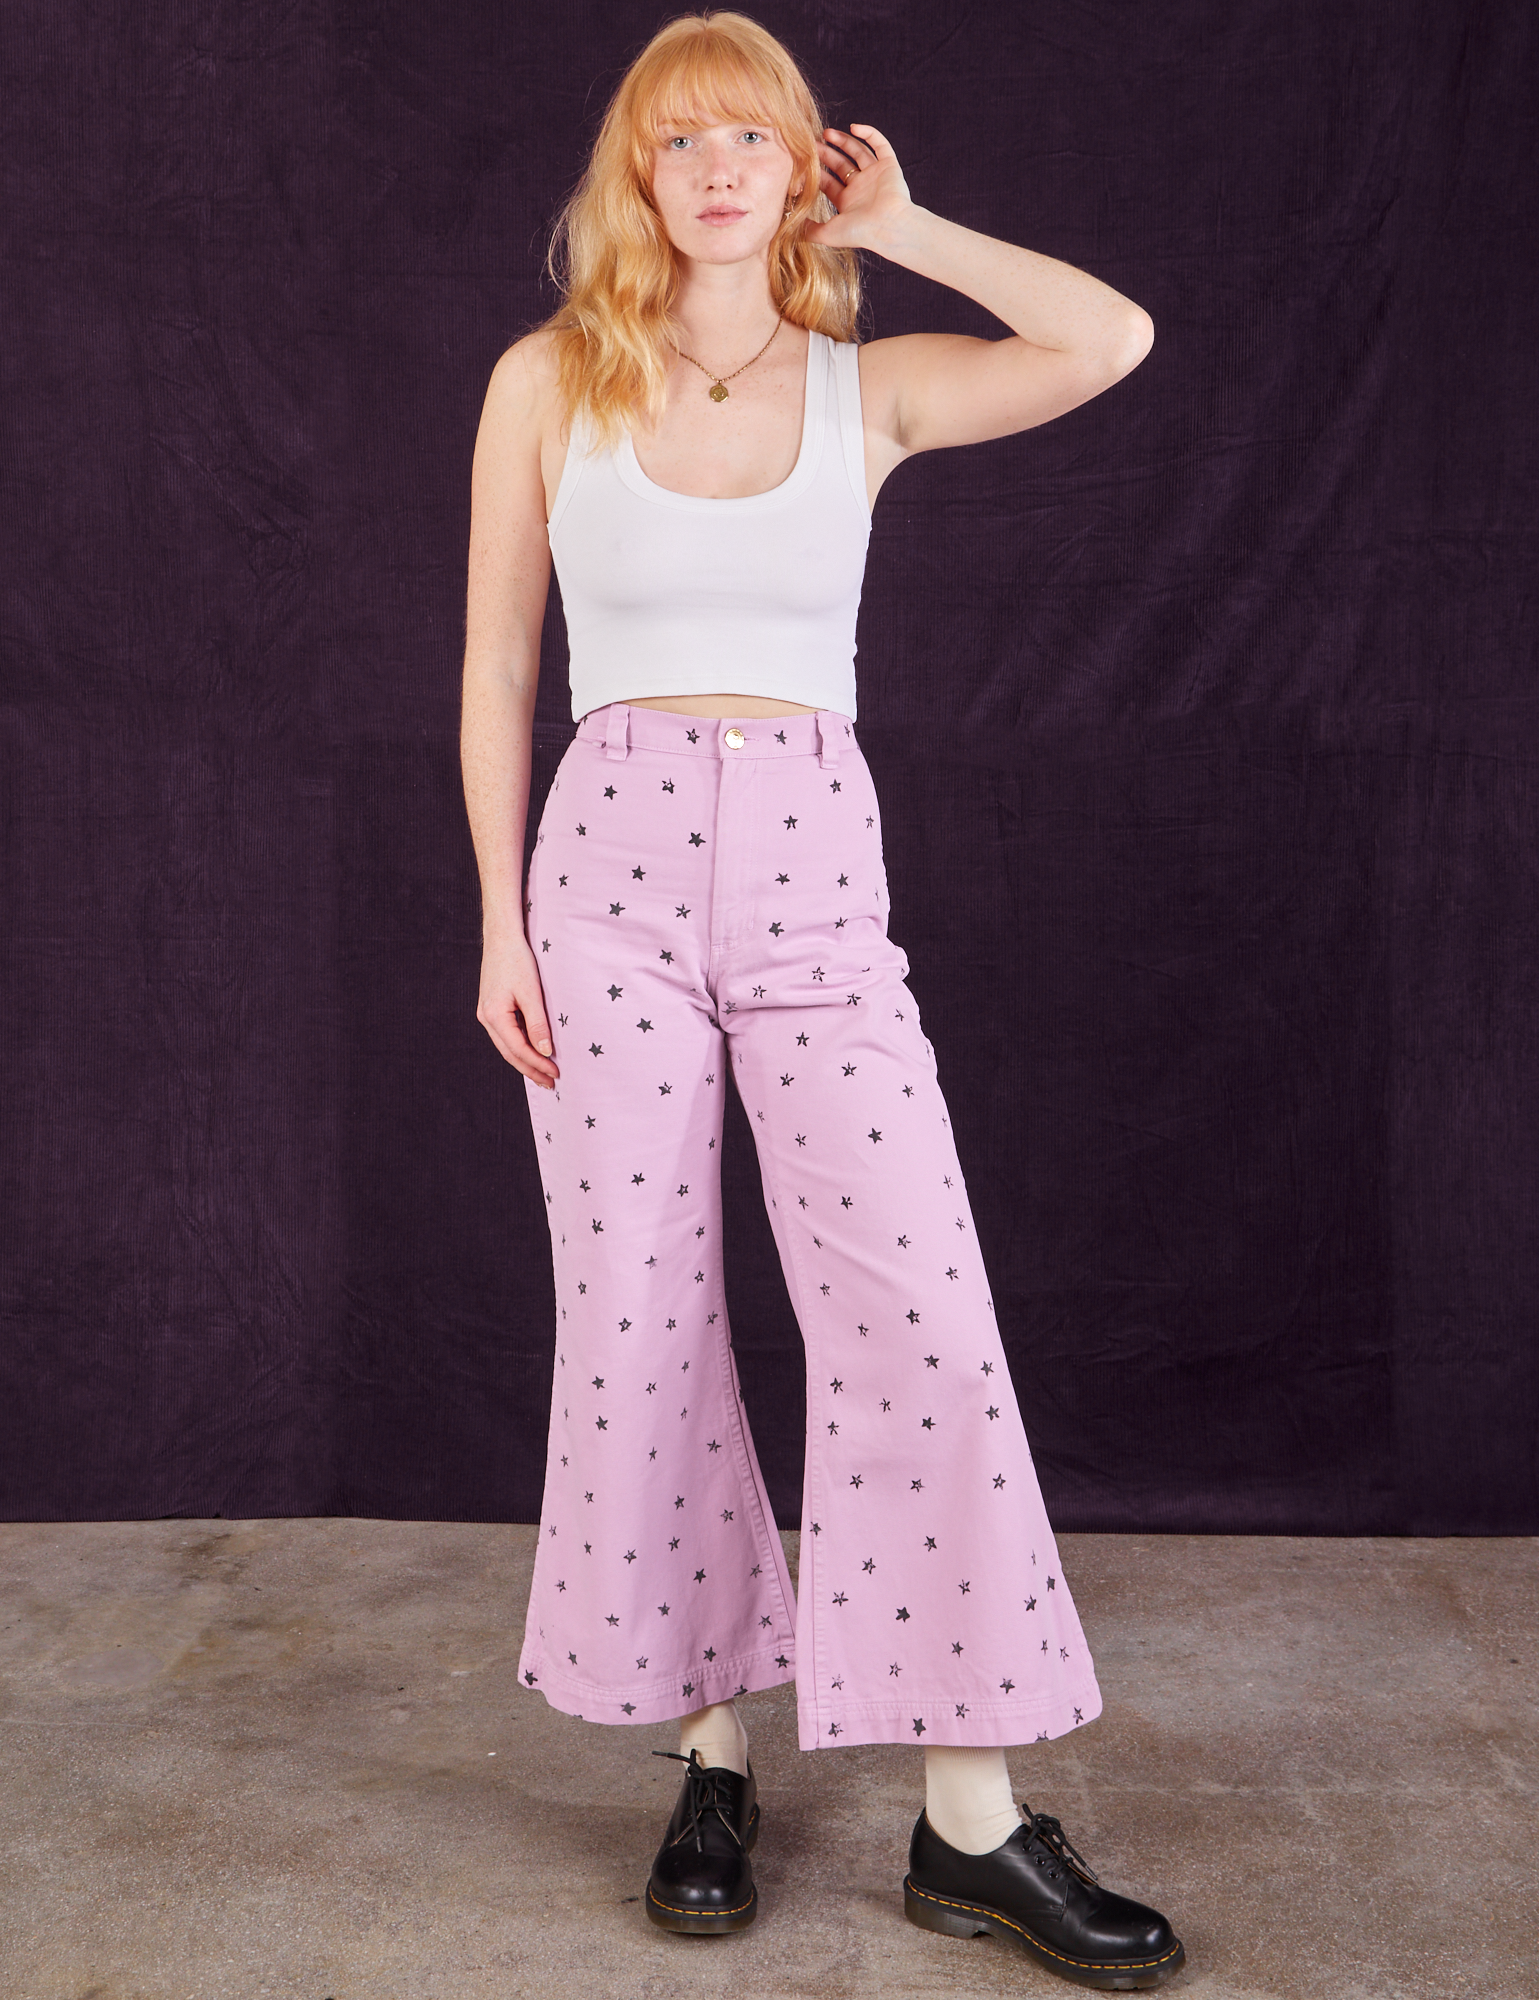 Margaret is wearing Star Bell Bottoms in Lilac Purple and Cropped Tank in vintage tee off-white